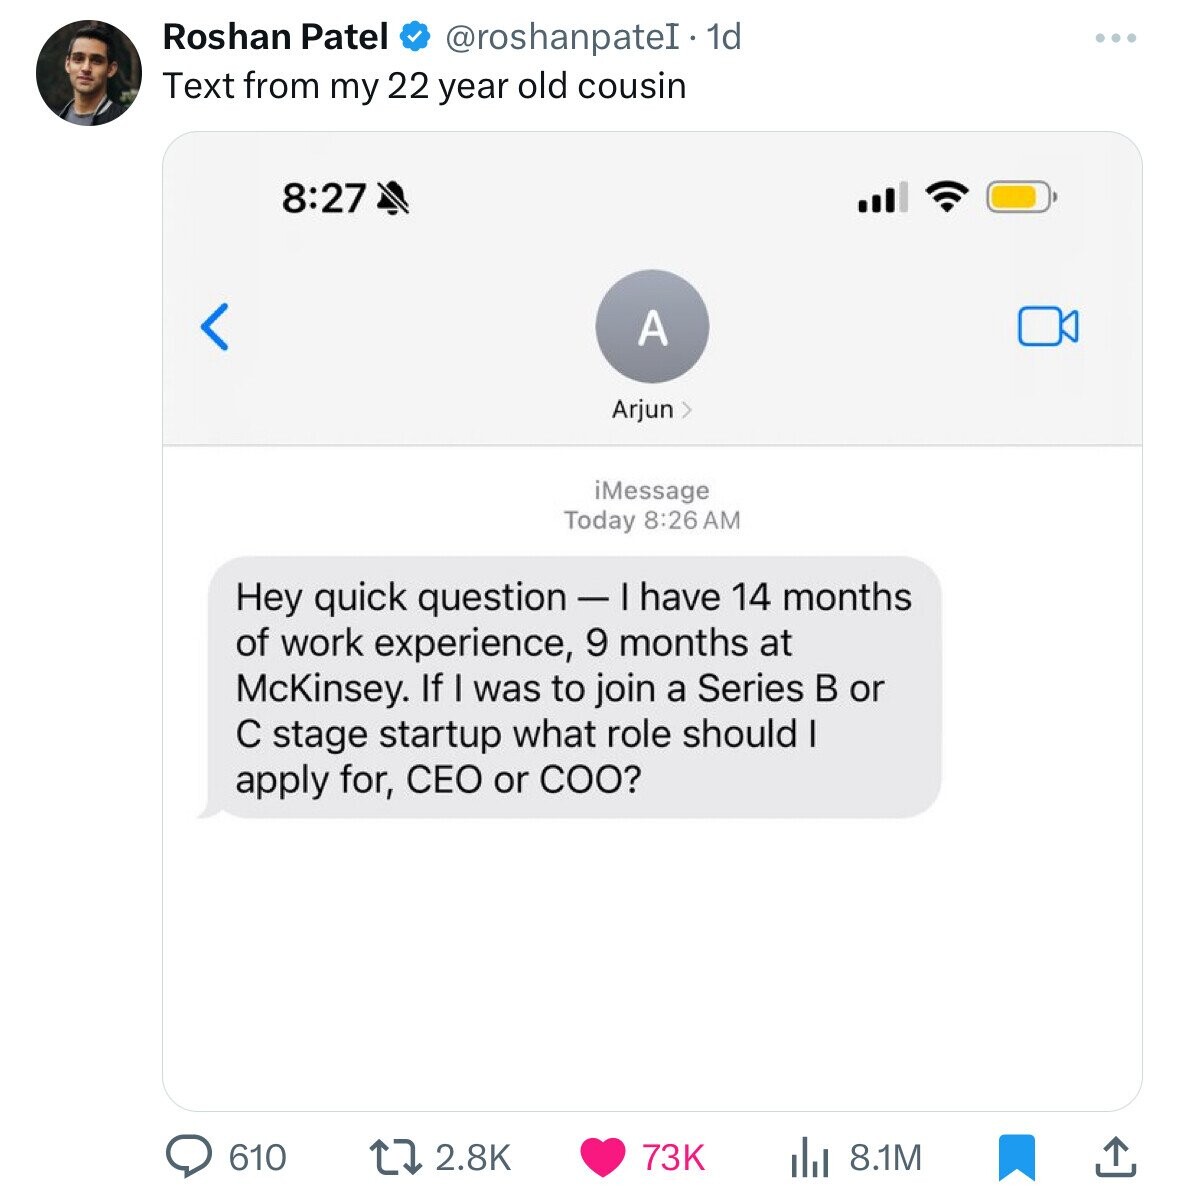 web page - Roshan Patel 1d Text from my 22 year old cousin  Hey quick question I have 14 months of work experience, 9 months at McKinsey. If I was to join a Series B or C stage startup what role should I apply for, Ceo or Coo? iMessage Today 73K 8.1M…